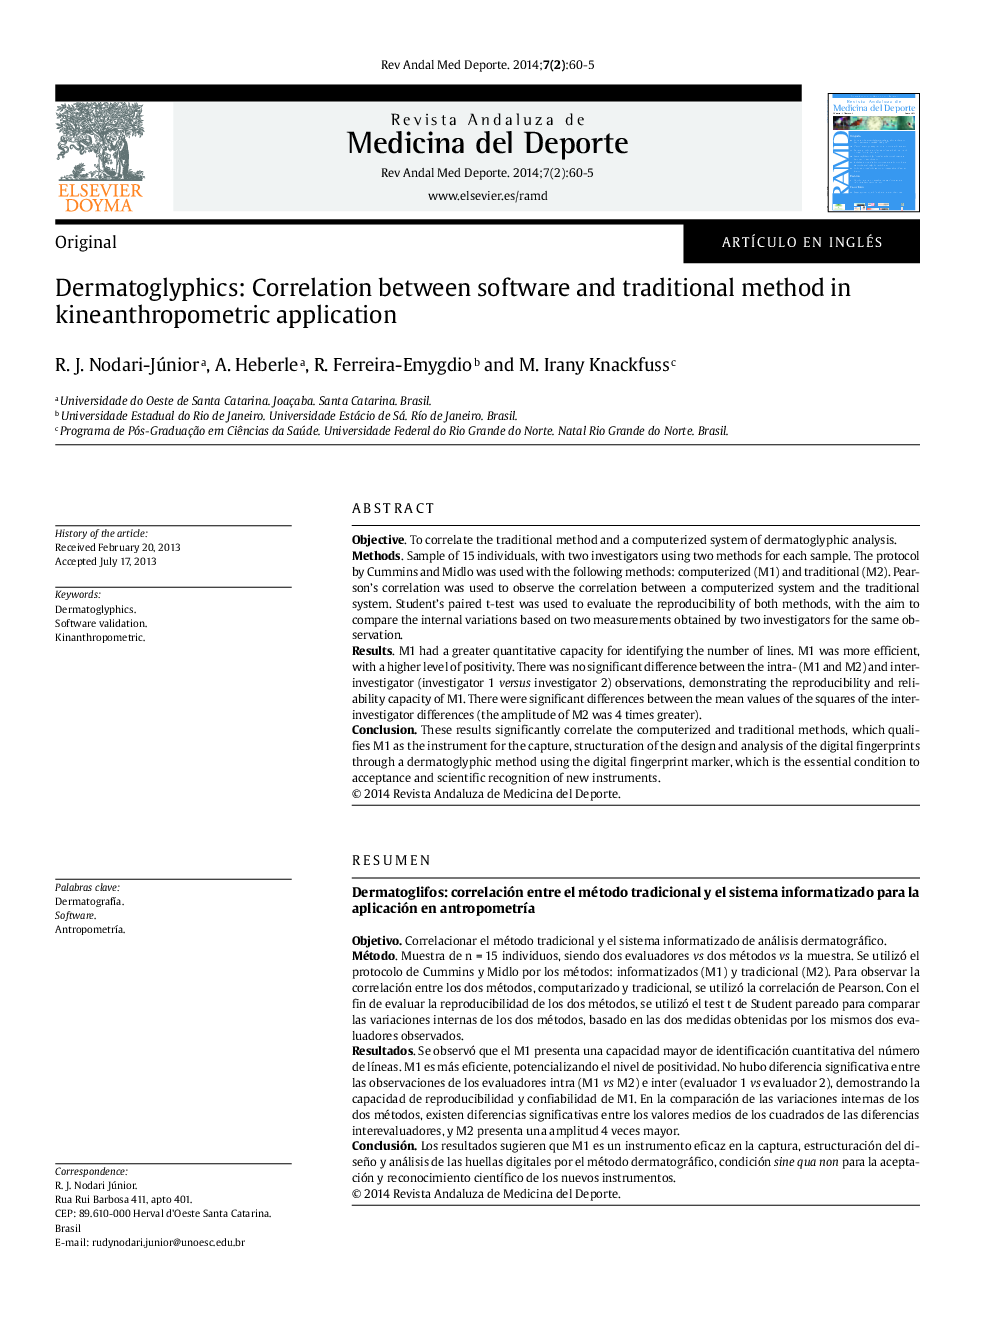 Dermatoglyphics: Correlation between software and traditional method in kineanthropometric application